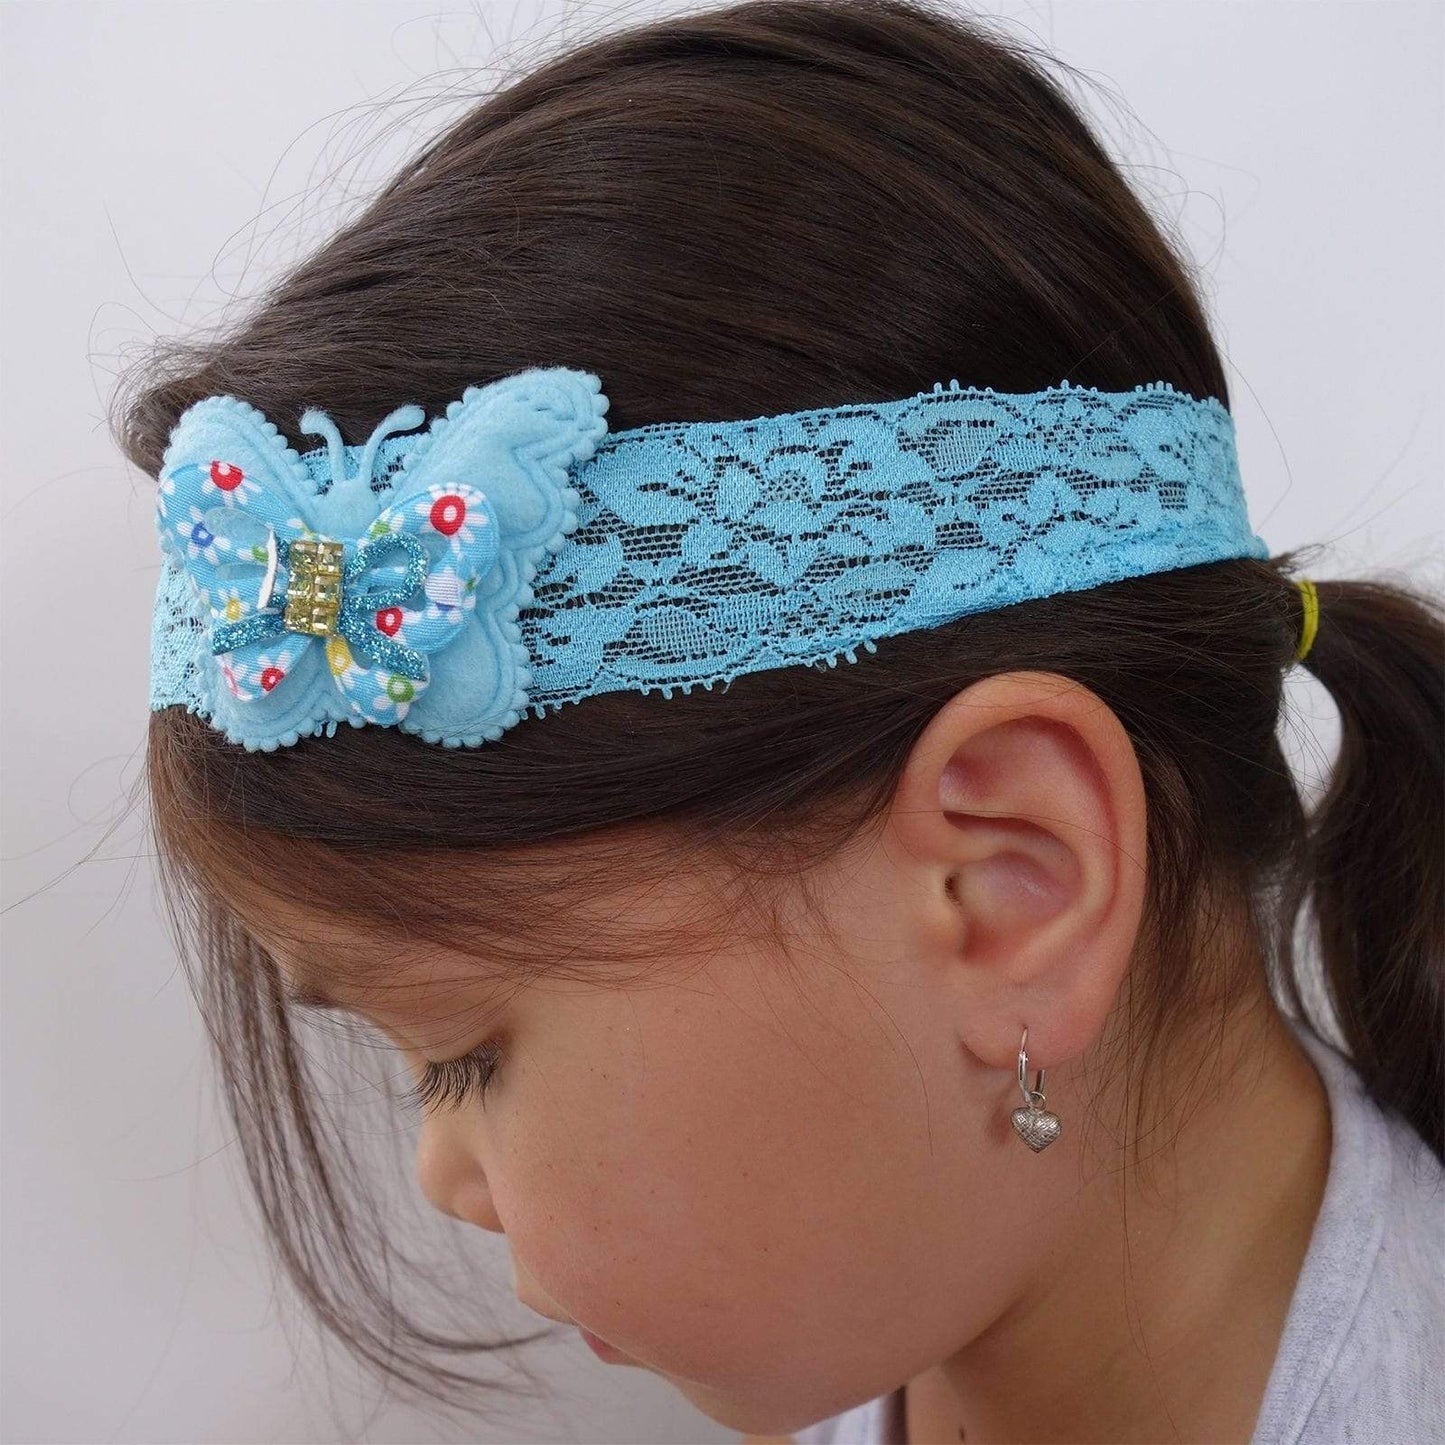 Blue Lace Butterfly Hairband Headband Girl Kid Toddler Baby Alice Hair Head Band Blue Lace Butterfly Hairband Headband Girl Kid Toddler Baby Alice Hair Head Band